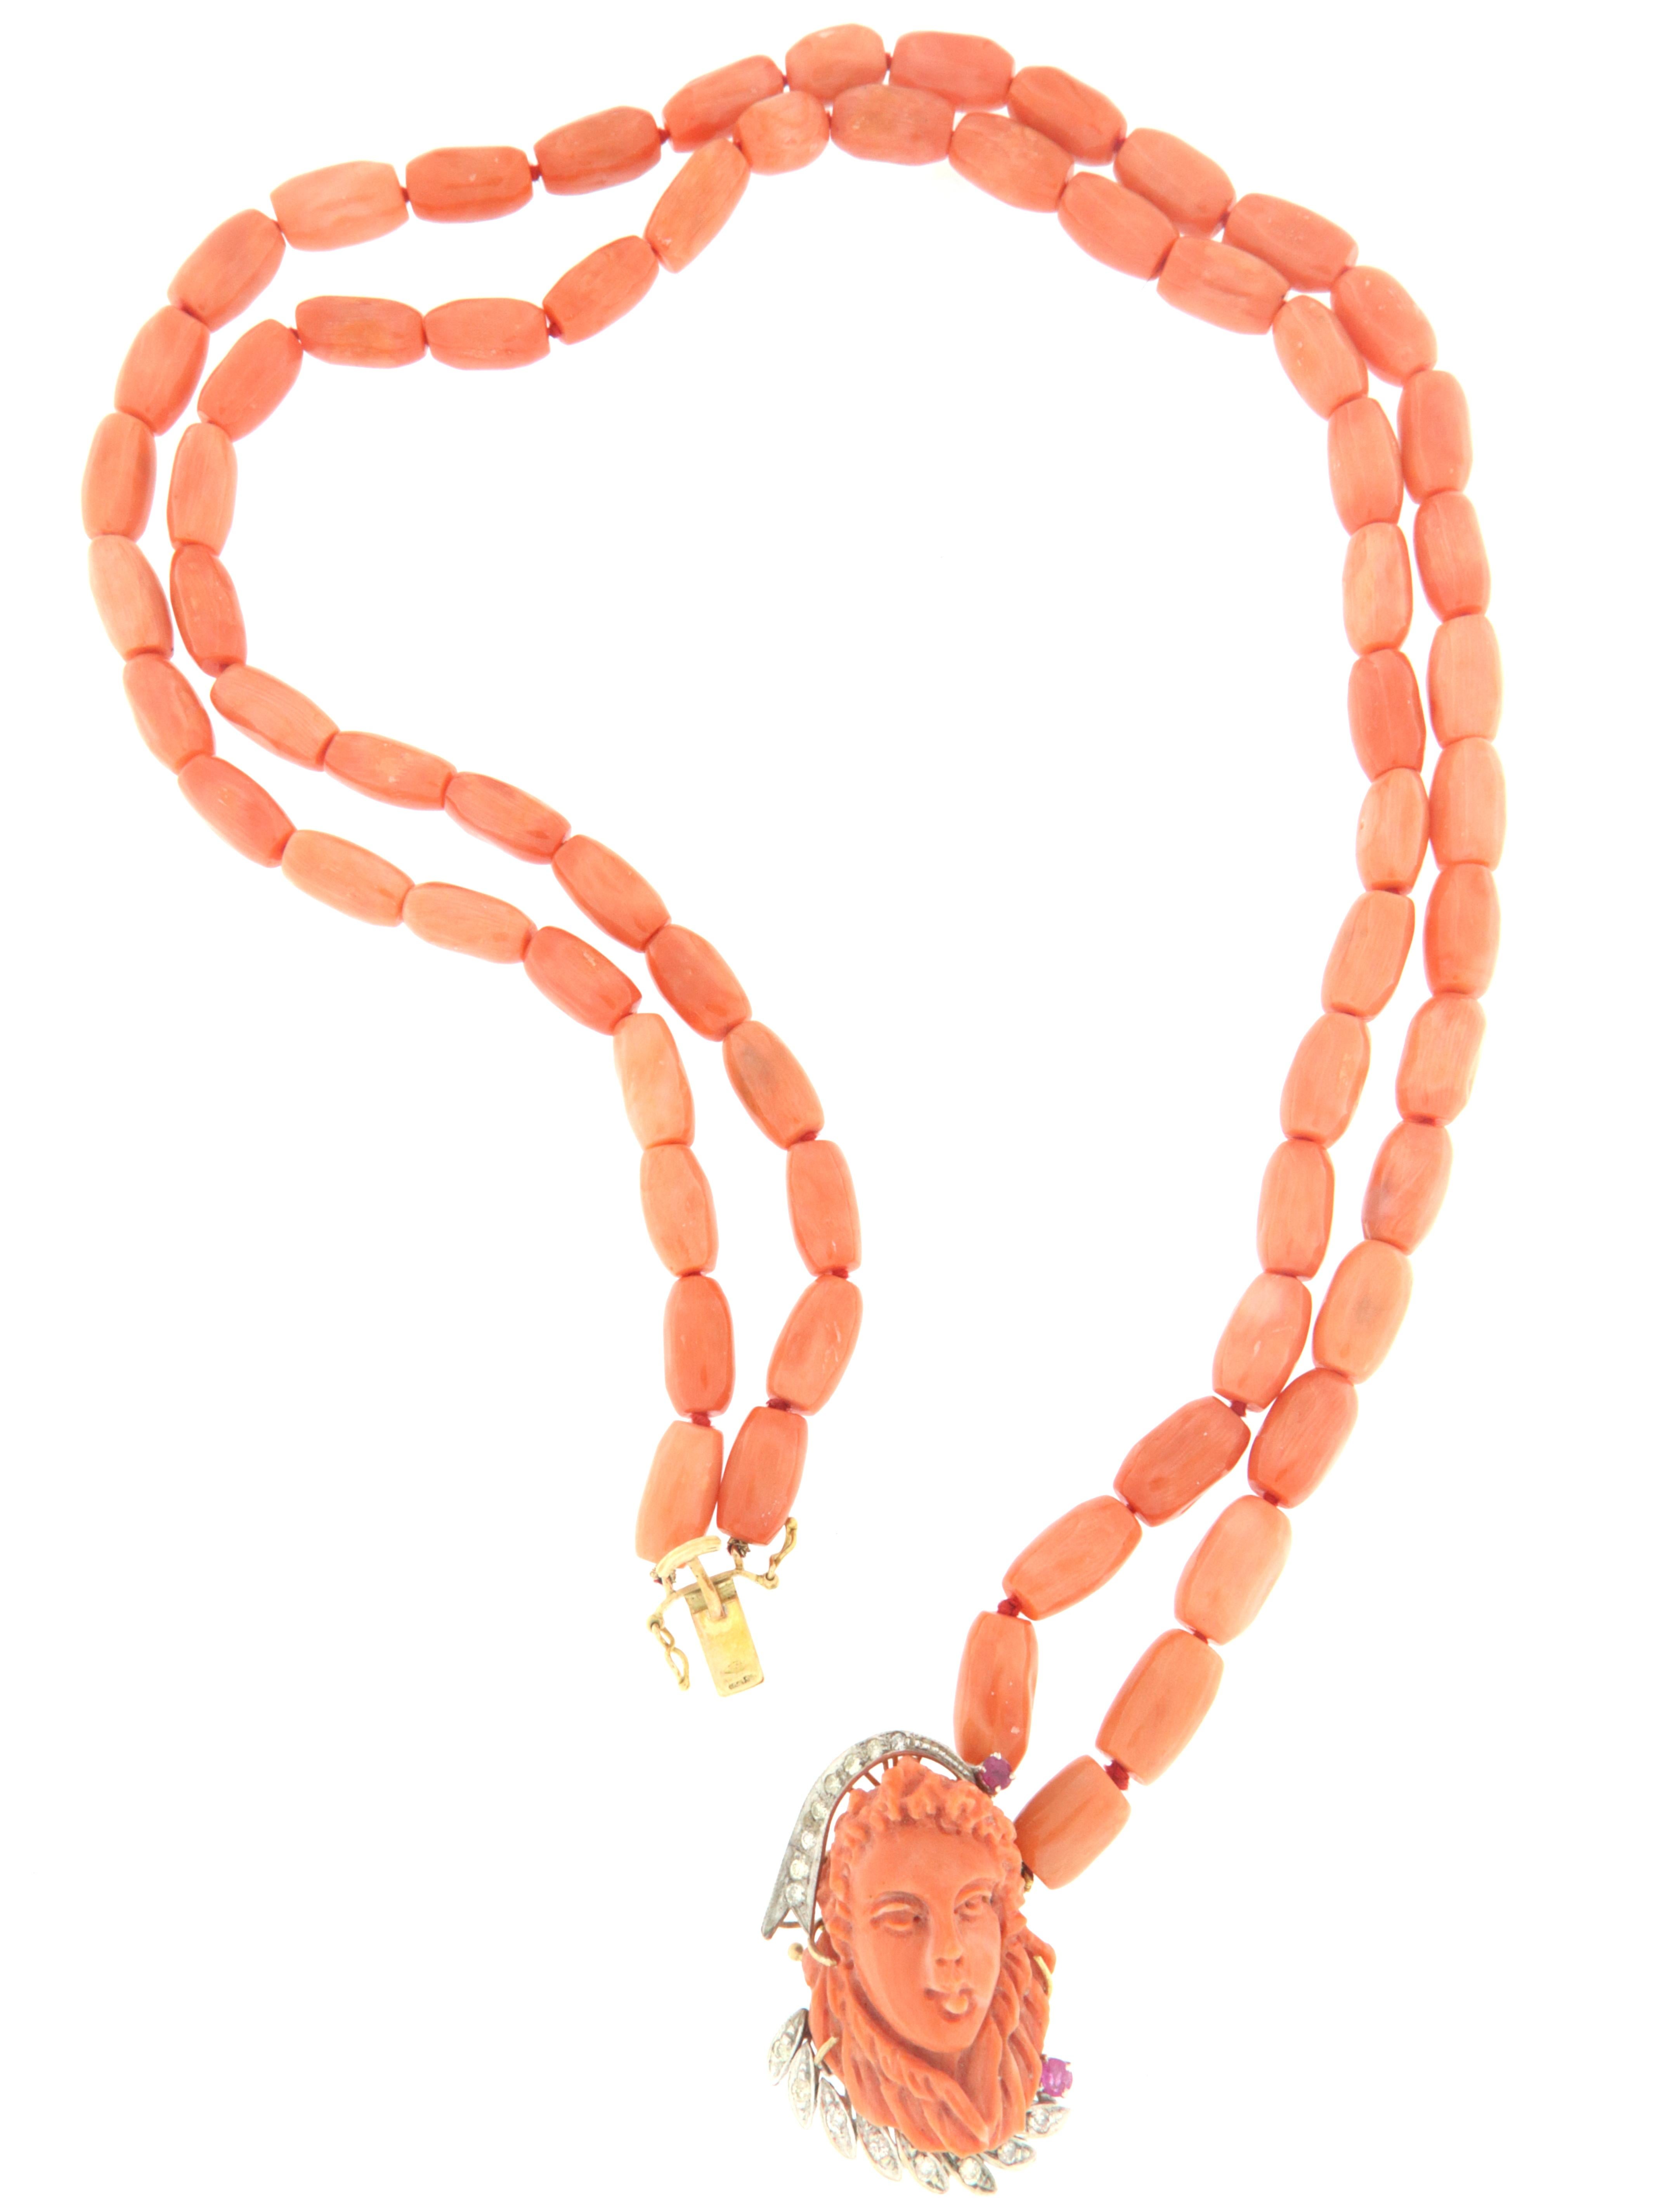 Brilliant Cut Coral Diamonds Rubies 14 Karat Yellow And White Gold Multi-Strand Necklace For Sale